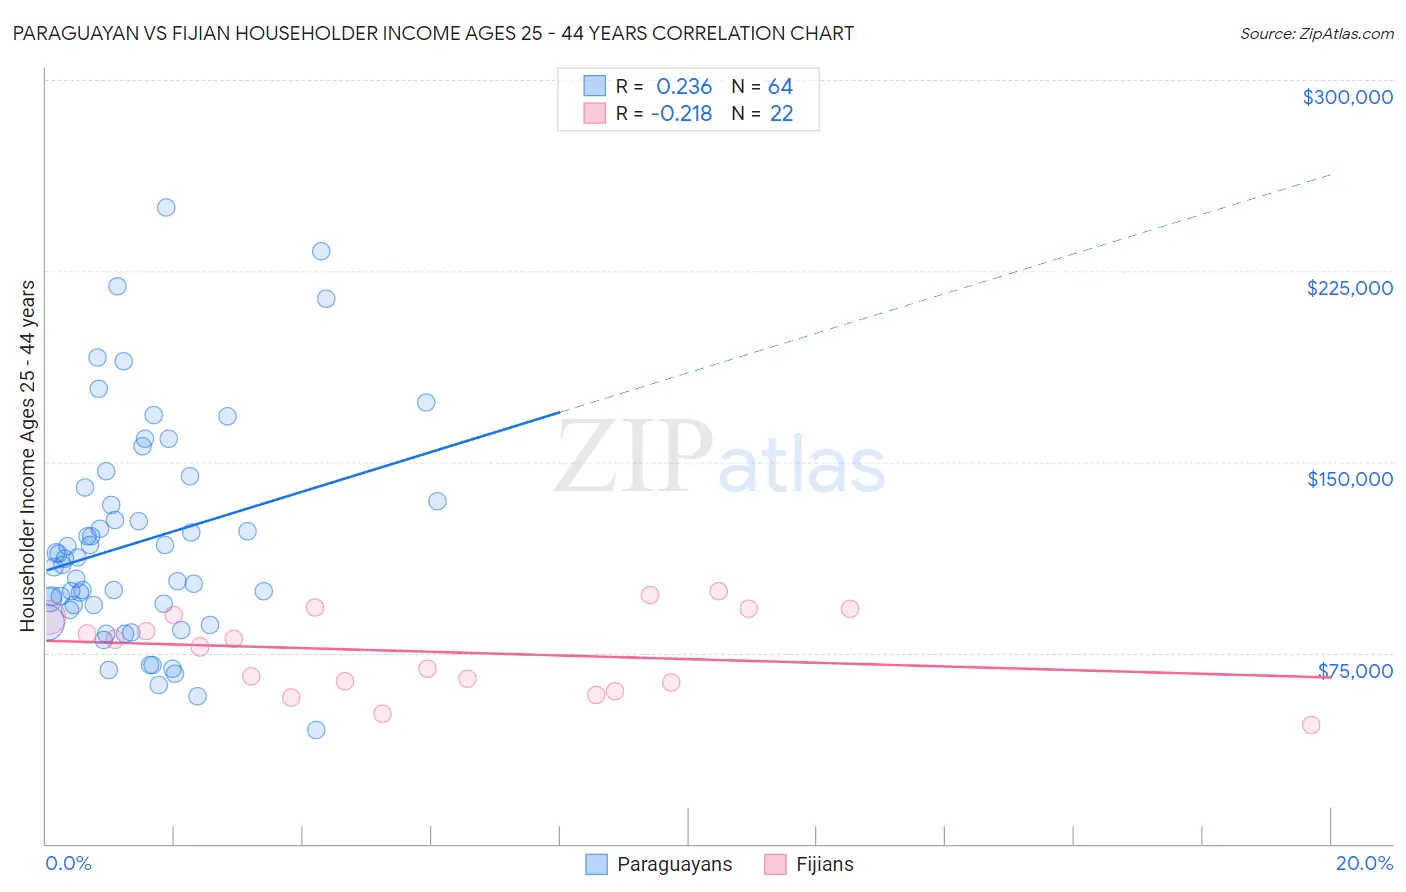 Paraguayan vs Fijian Householder Income Ages 25 - 44 years